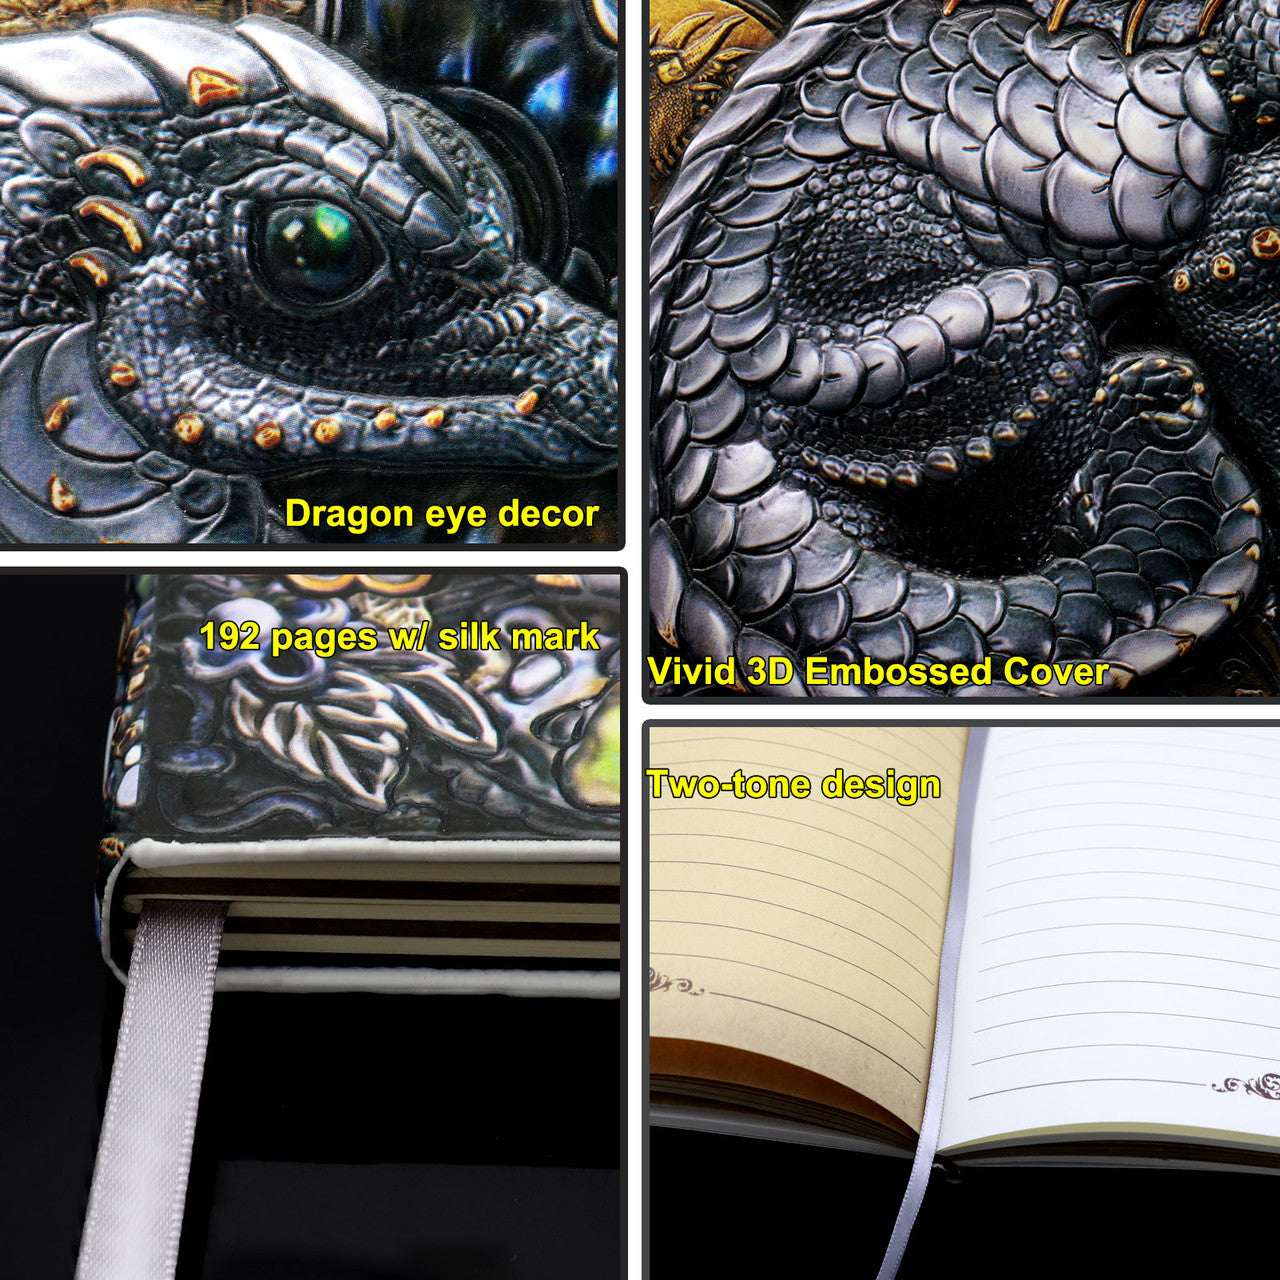 HomWanna DND Dungeons and Dragons Journal Notebook - 3D Embossed Leather  Journal Dragon Journal with Lined Paper Cool DND Notebook Accessories DND